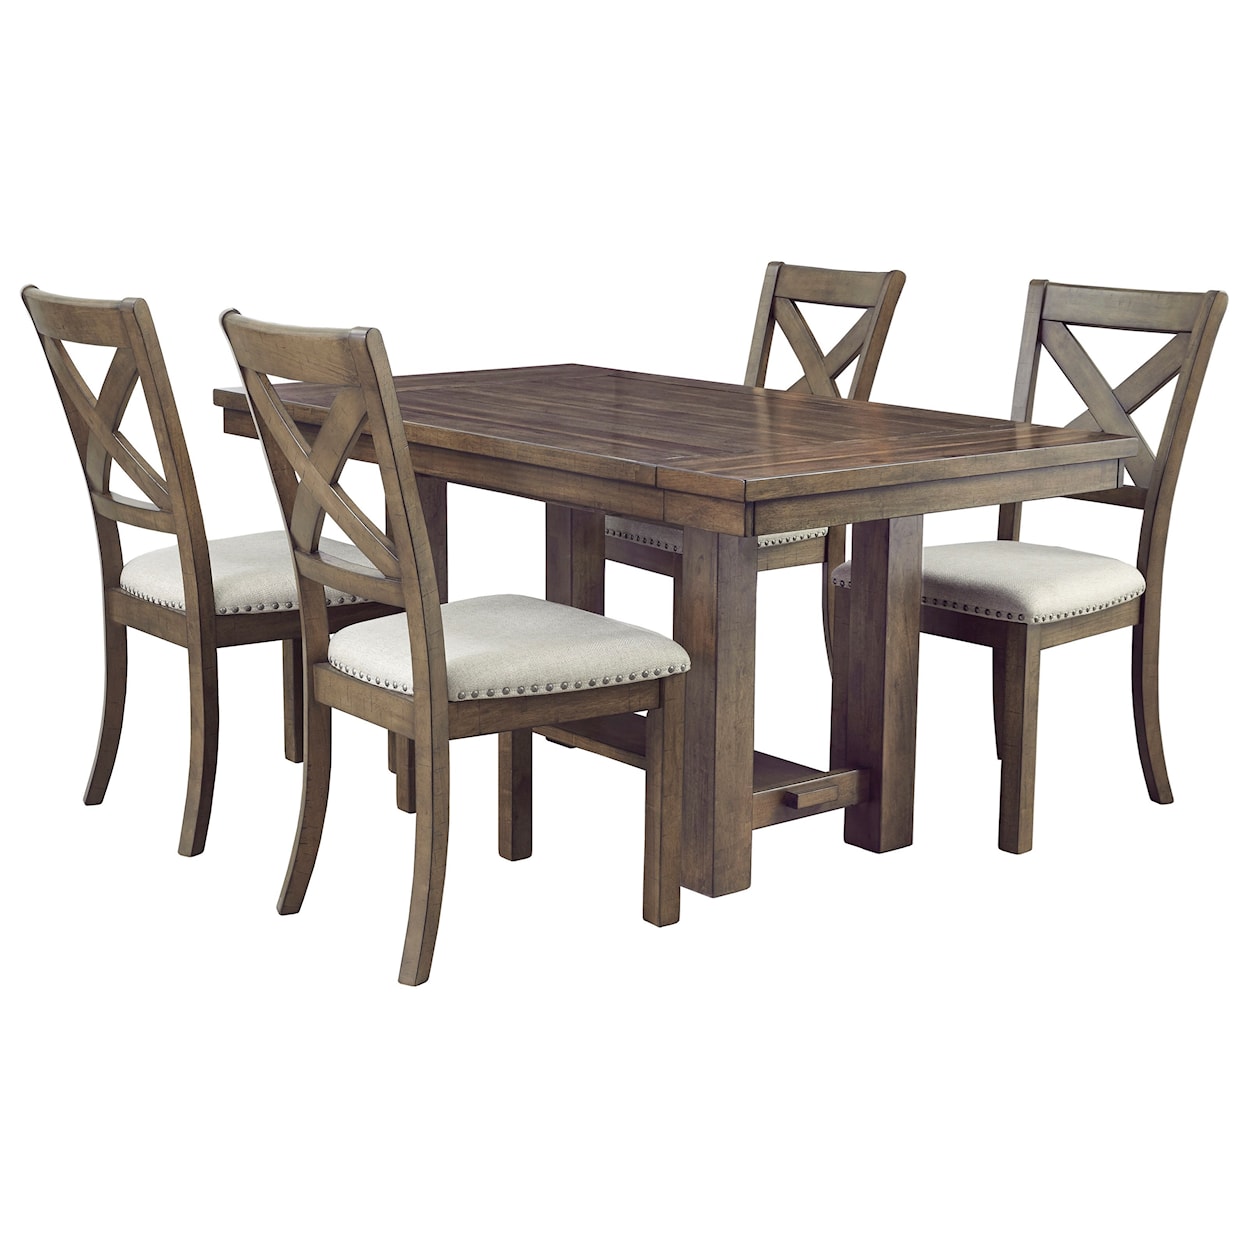 Signature Design by Ashley Furniture Moriville 5-Piece Table and Chair Set